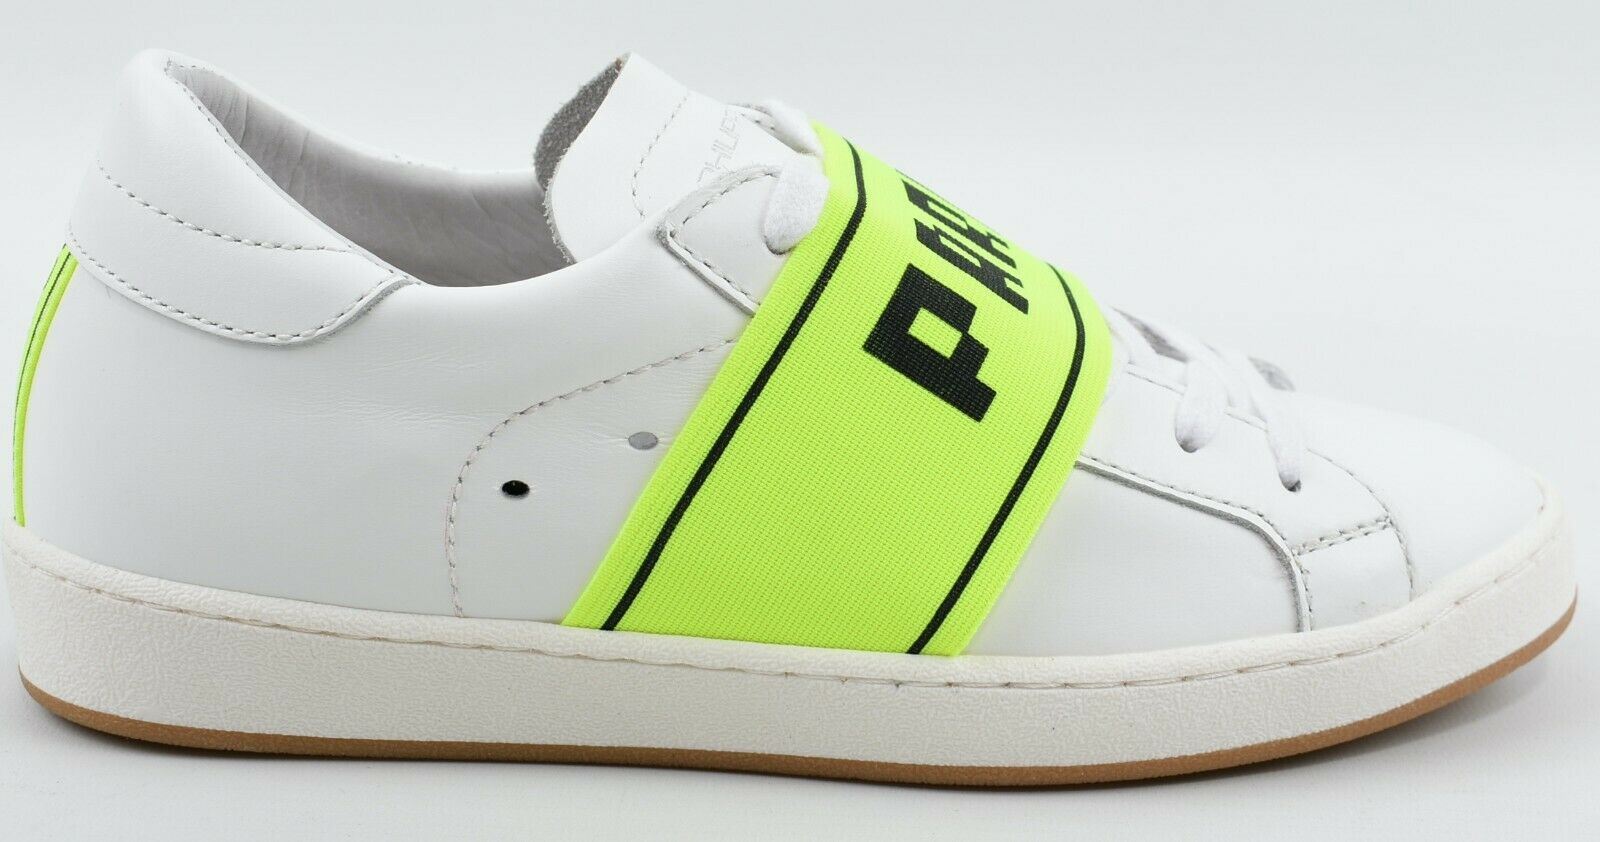 PHILIPPE MODEL Women's White/Neon Green Leather Trainers, Wedge Heel, size UK 3